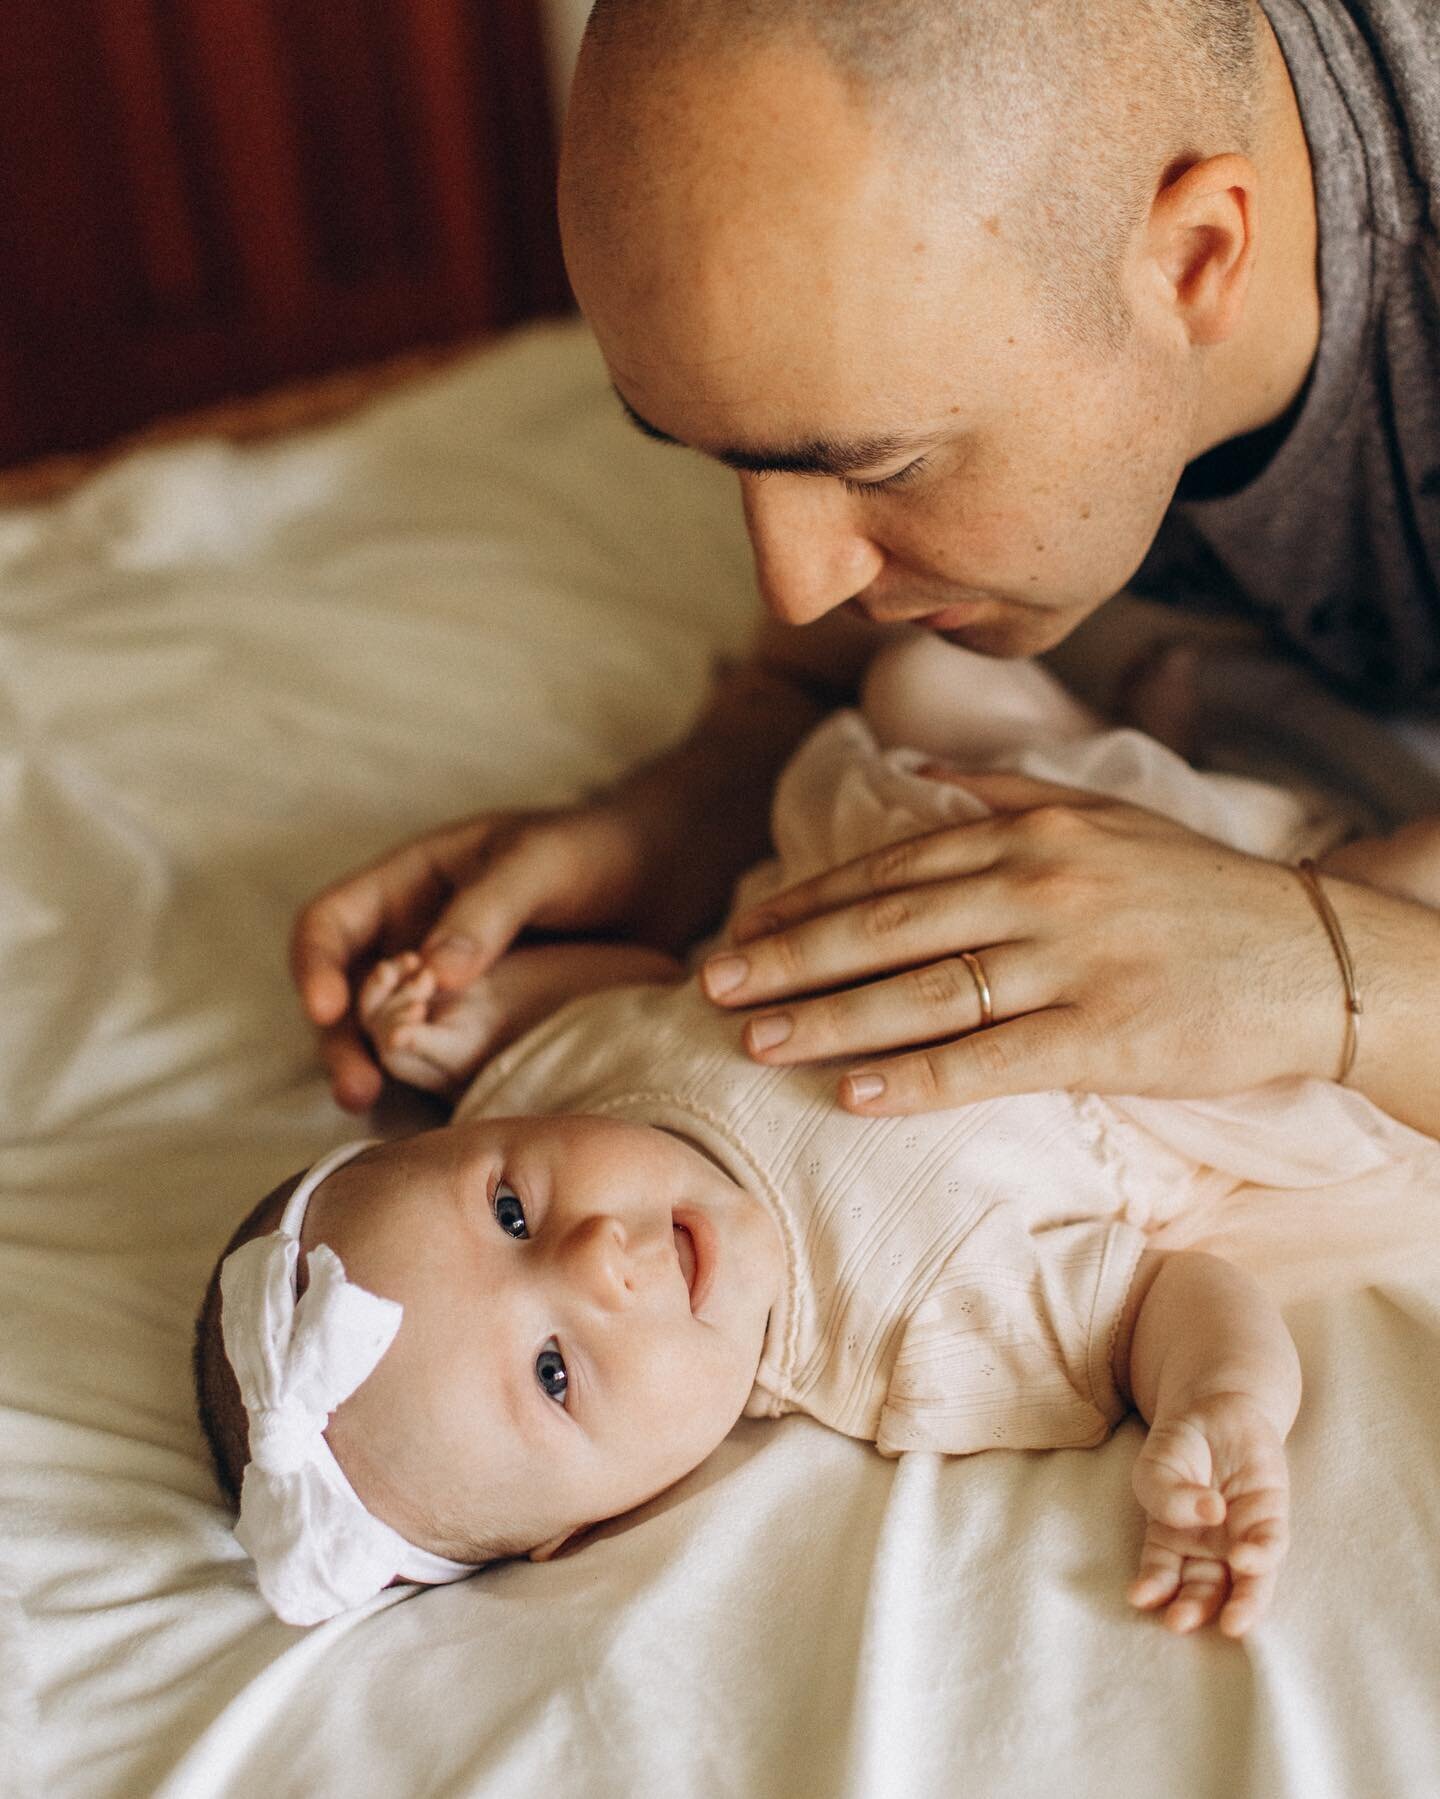 A bald man gently touches a smiling baby lying on a bed, both looking at each other. the baby wears a white bow headband and a cream onesie.